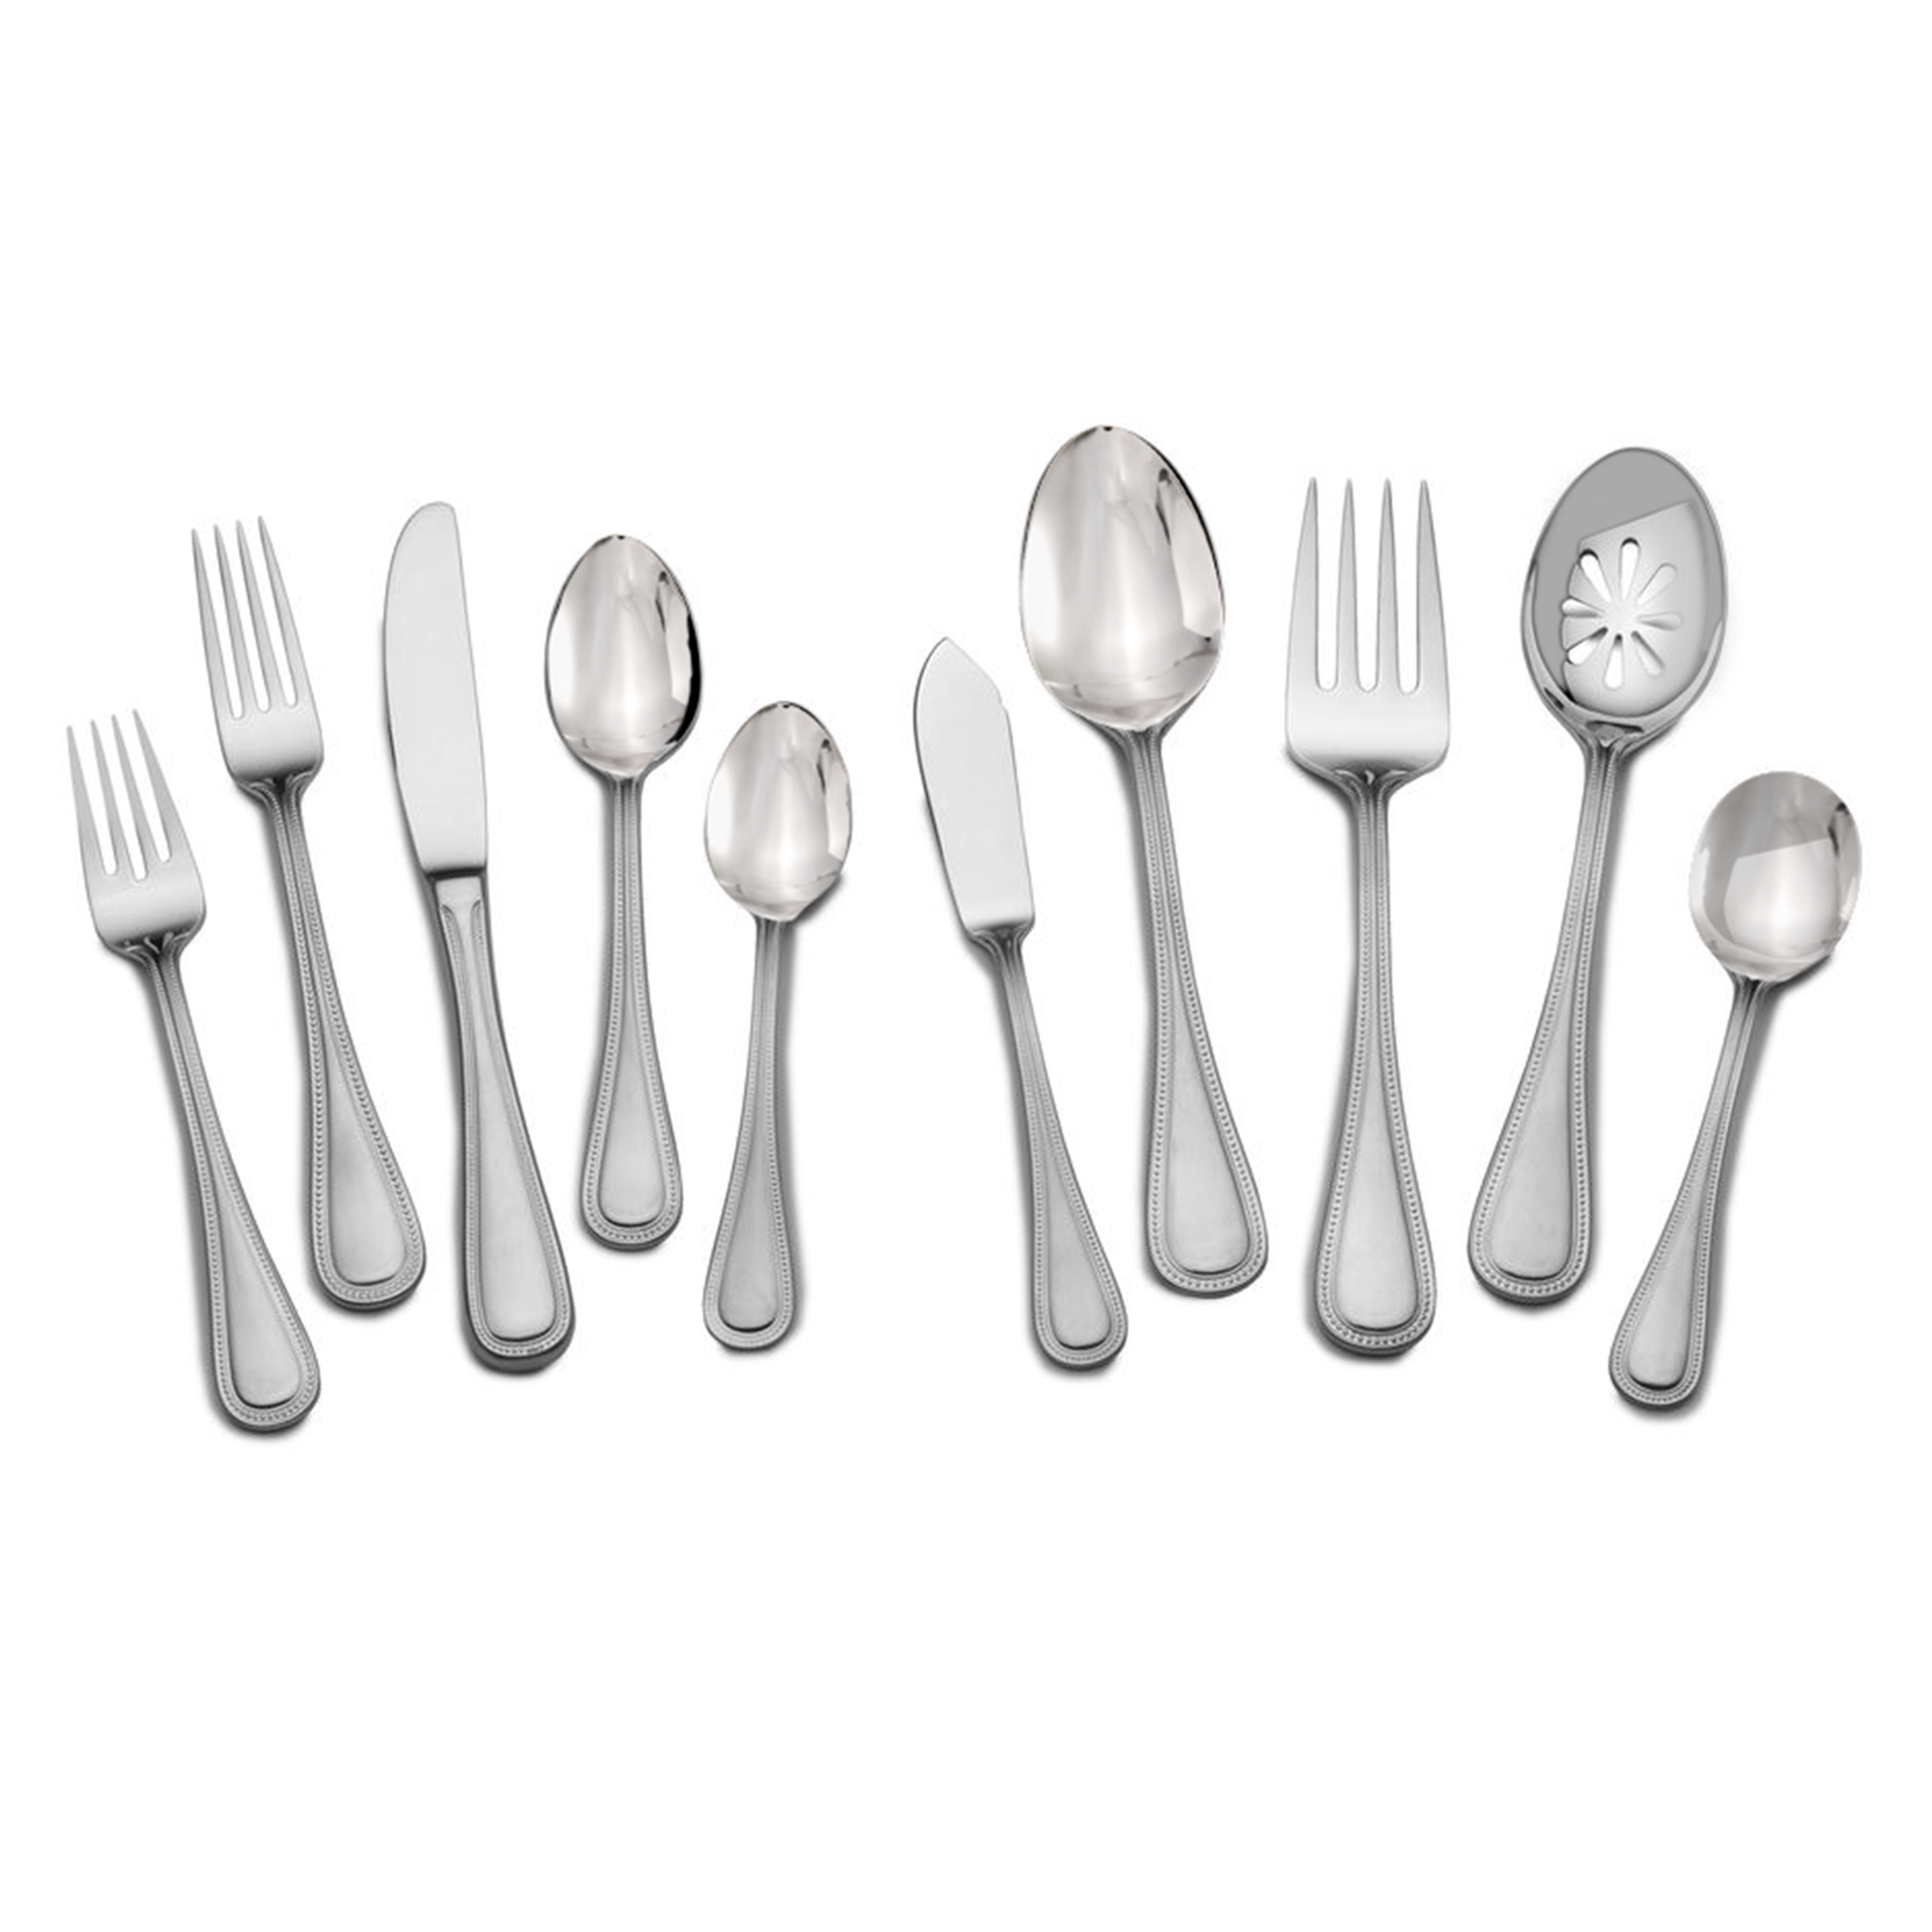 Towle "Beaded Antique" 45-pc. Service for 8 18/10 Stainless Steel Flatware  Set | Ross-Simons